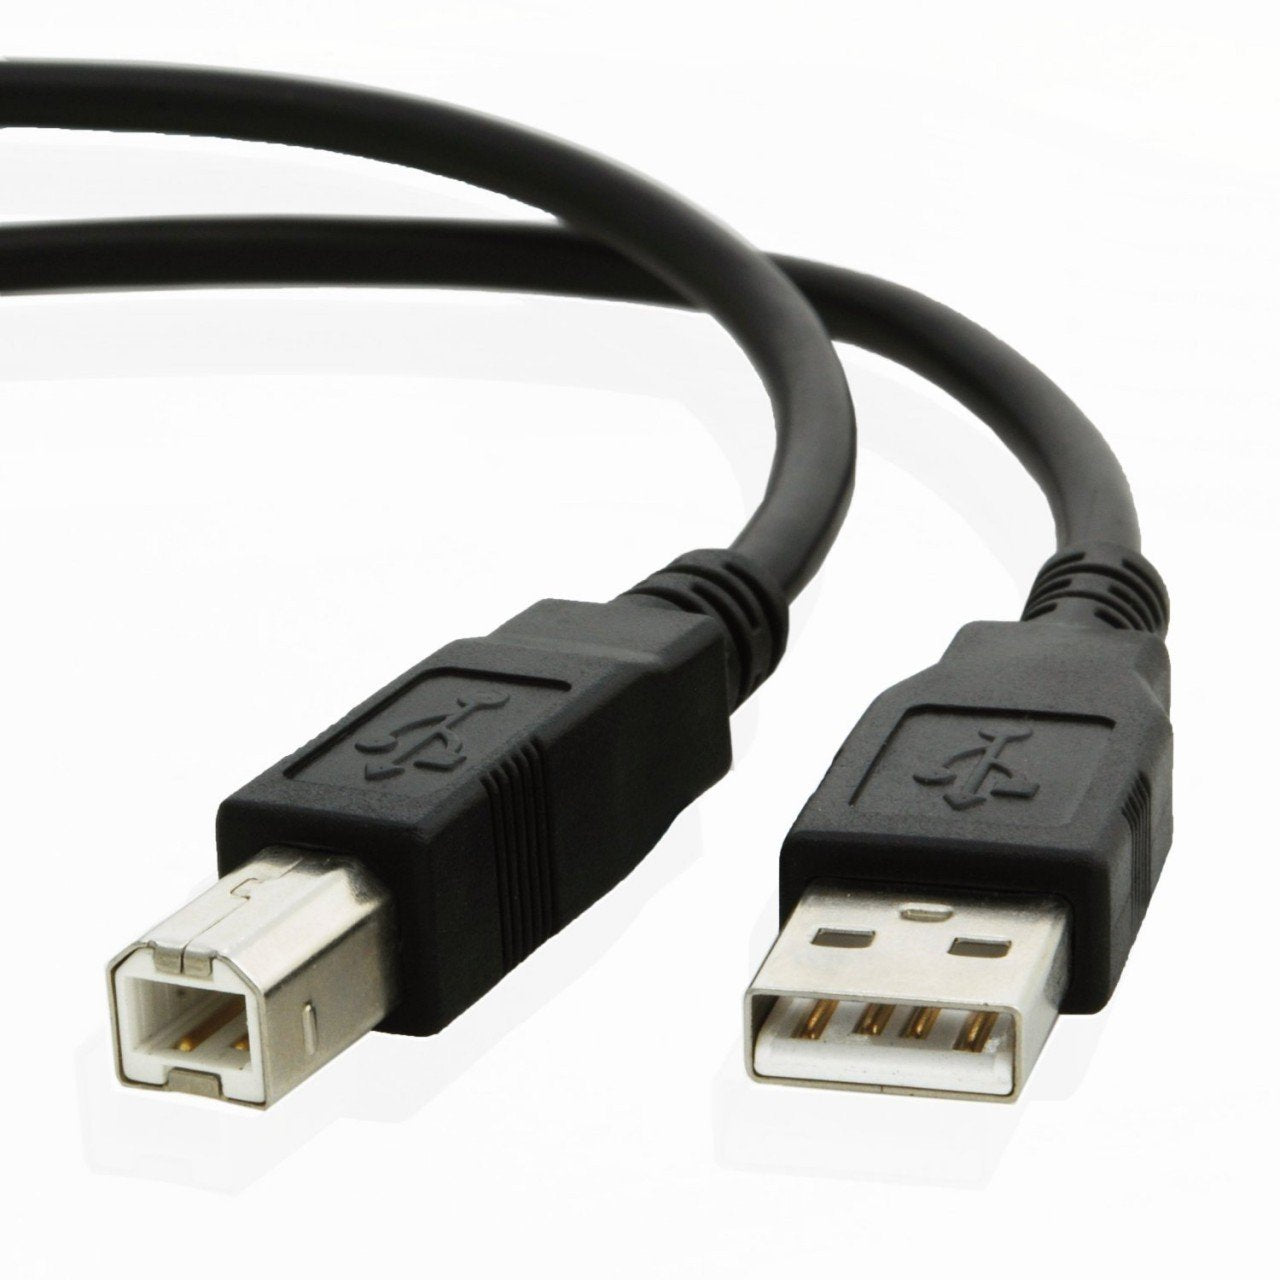 USB cable for Brother MFC-J4420DW